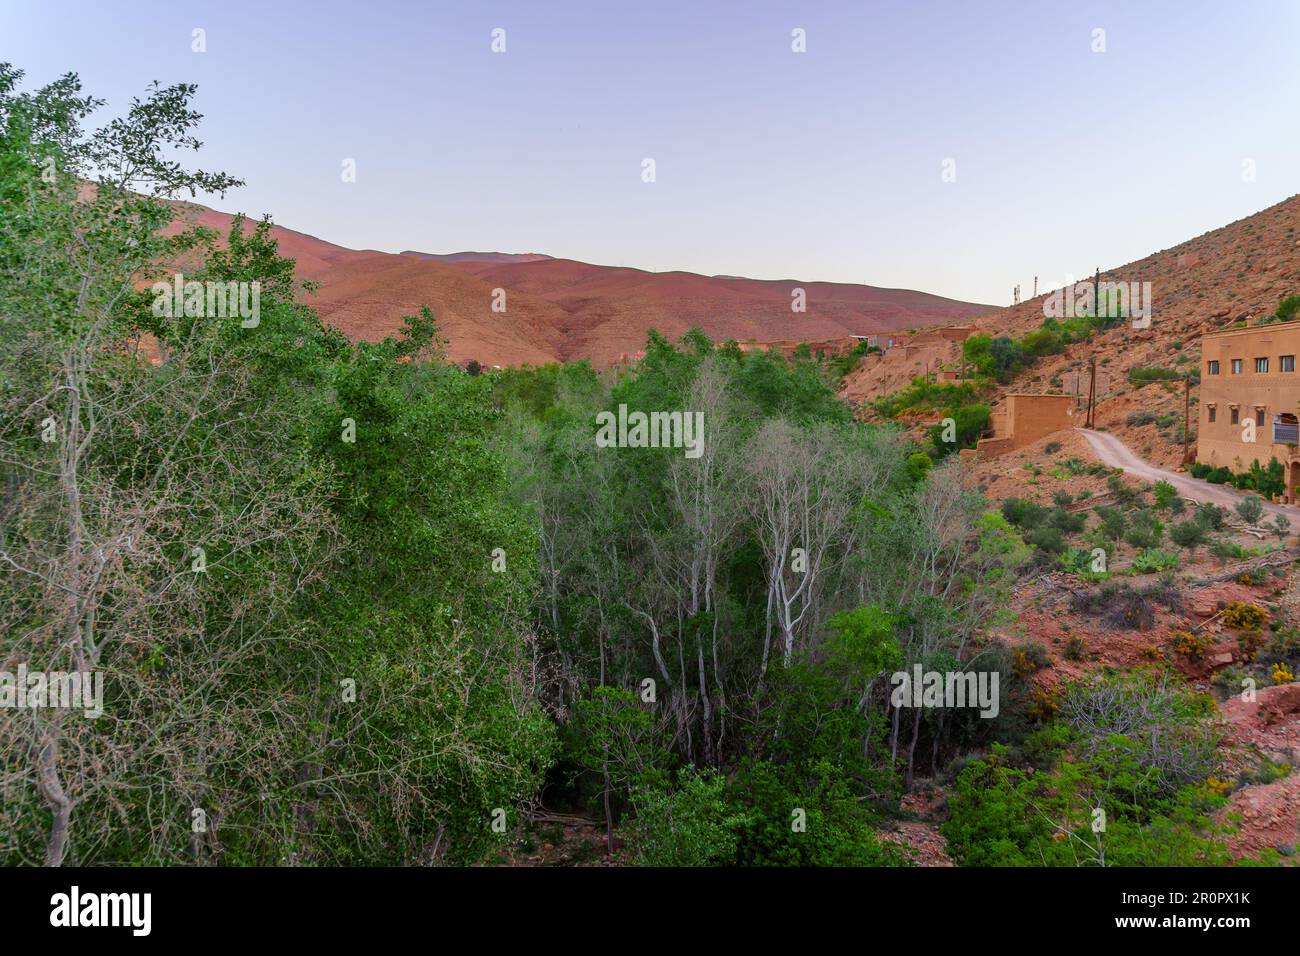 View of the Dades Gorge landscape, in the High Atlas Mountains, Central Morocco Stock Photo